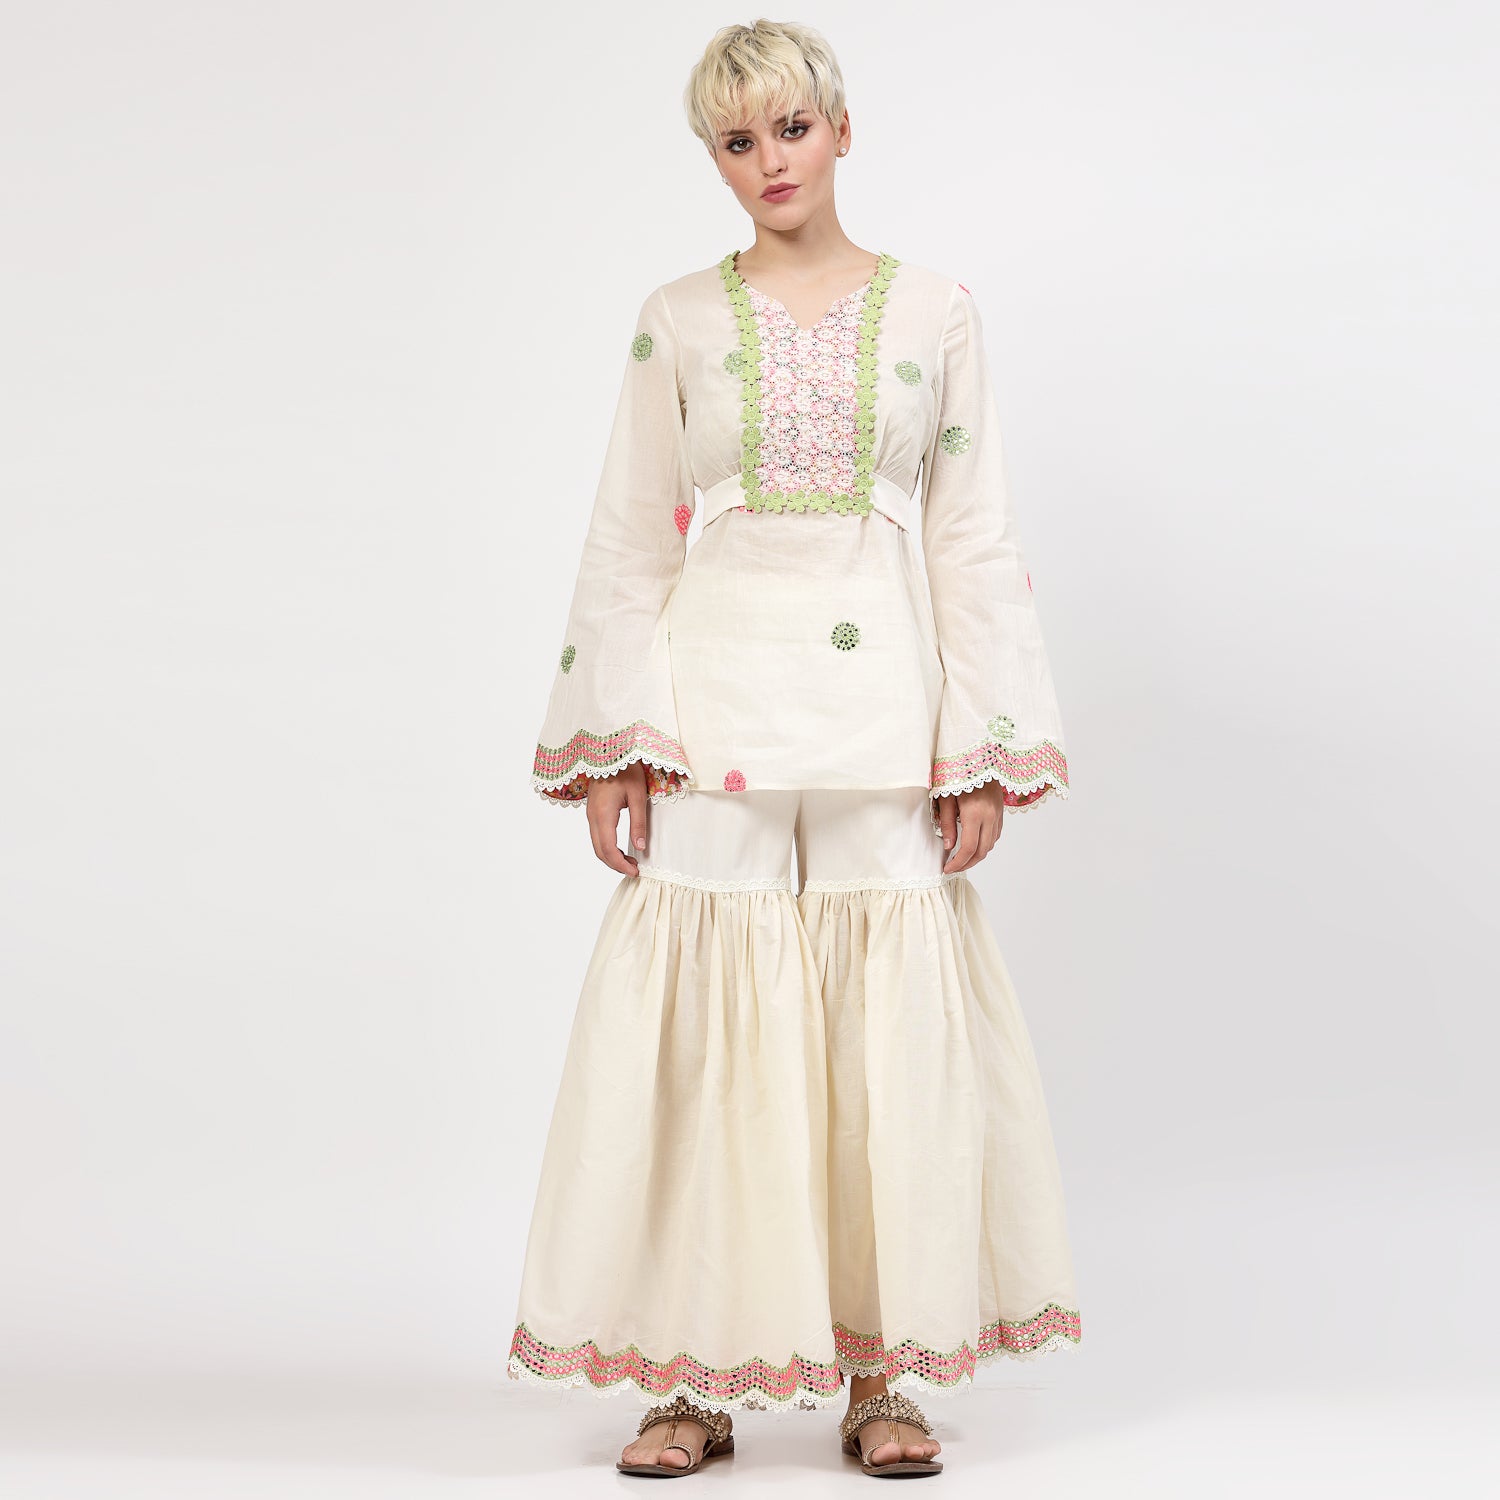 Off White Cotton Mirror Embroidery Top With Flower Net Lace At Yoke